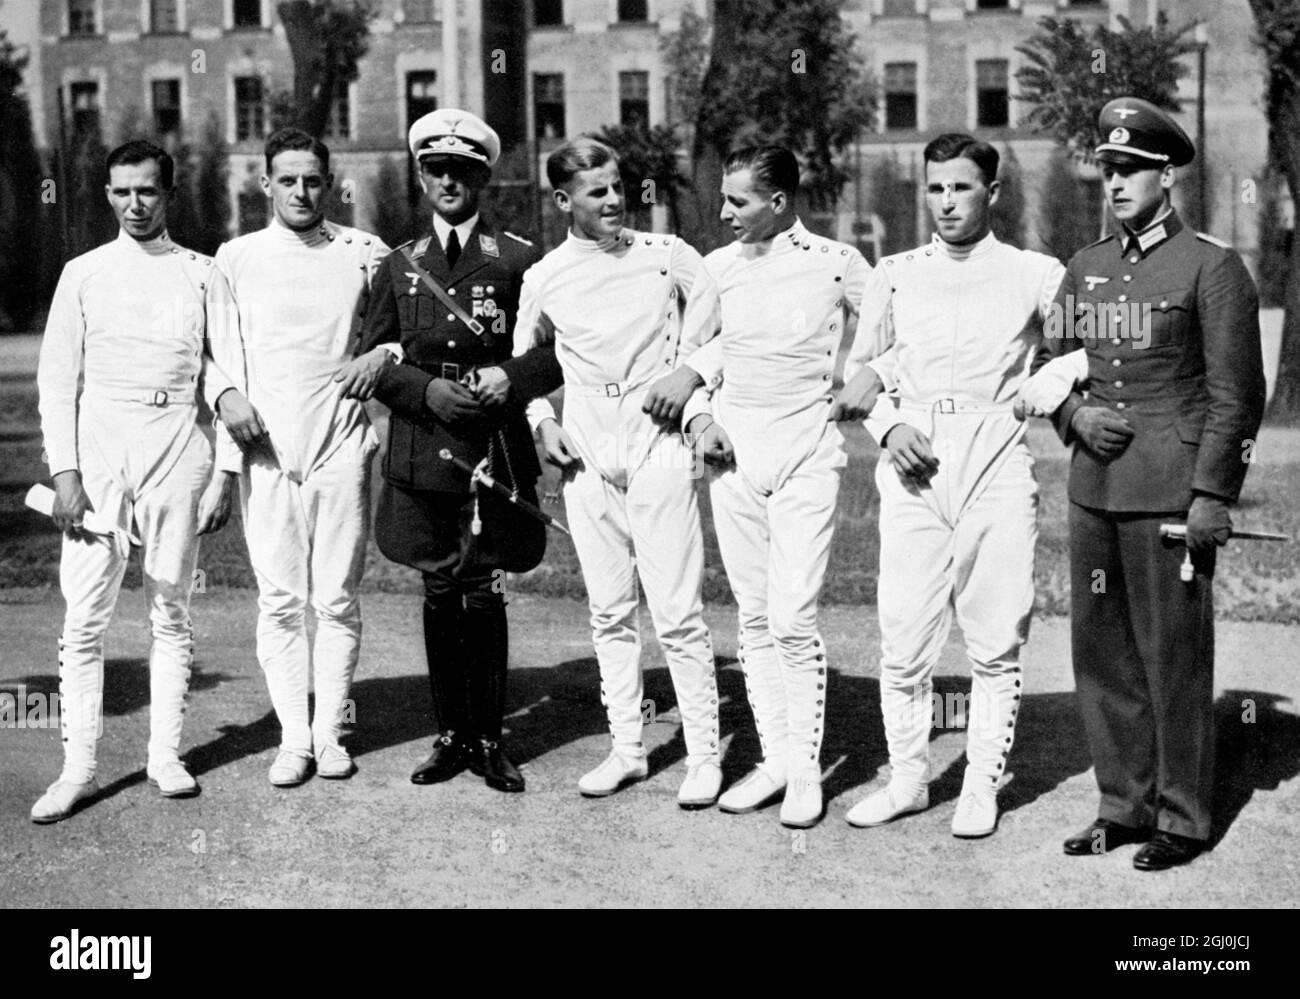 1936 Olympics - Fencing - The team of the victorious German five in Budapest (l-r) First Lieutenant Birk, First Lieutenant Handrick, Captain Heigl, Second Lieutenant Puttmann, Second Lieutenant Cramer, Second Lieutenant Lemp, Second Lieutenant Schreiber. ©TopFoto Stock Photo